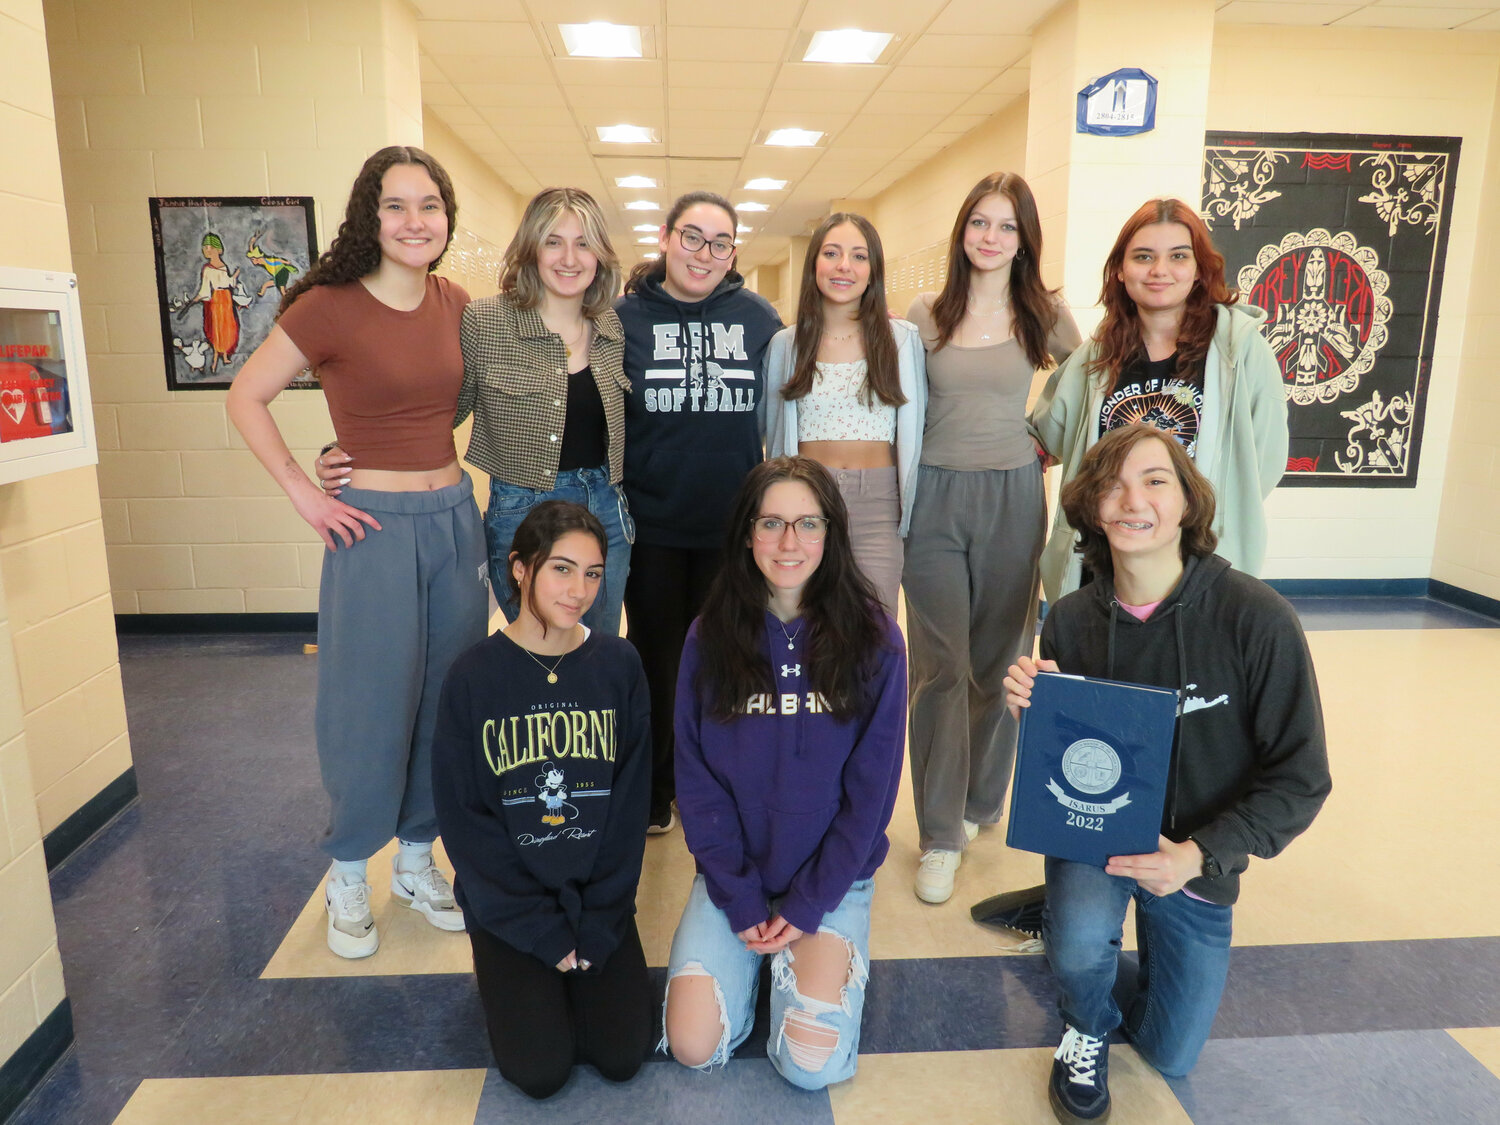 The Eastport-South Manor Jr.-Sr, High School “Stargazer” yearbook club members who garnered an honorable mention in Jostens’ “Look Book” include, back from left, Kalei Strelecki, Bianca Snow, Kim Cotrel, Liliana Recine, Yevheniya Rozmarynovych, Seleme Reyyan Gulbahce, and front from left, Morgan Lally, Alexandra Fay and Riley Bivona. Class of 2023 graduate Fiona Schlegel also contributed. COURTESY EASTPORT-SOUTH MANOR SCHOOL